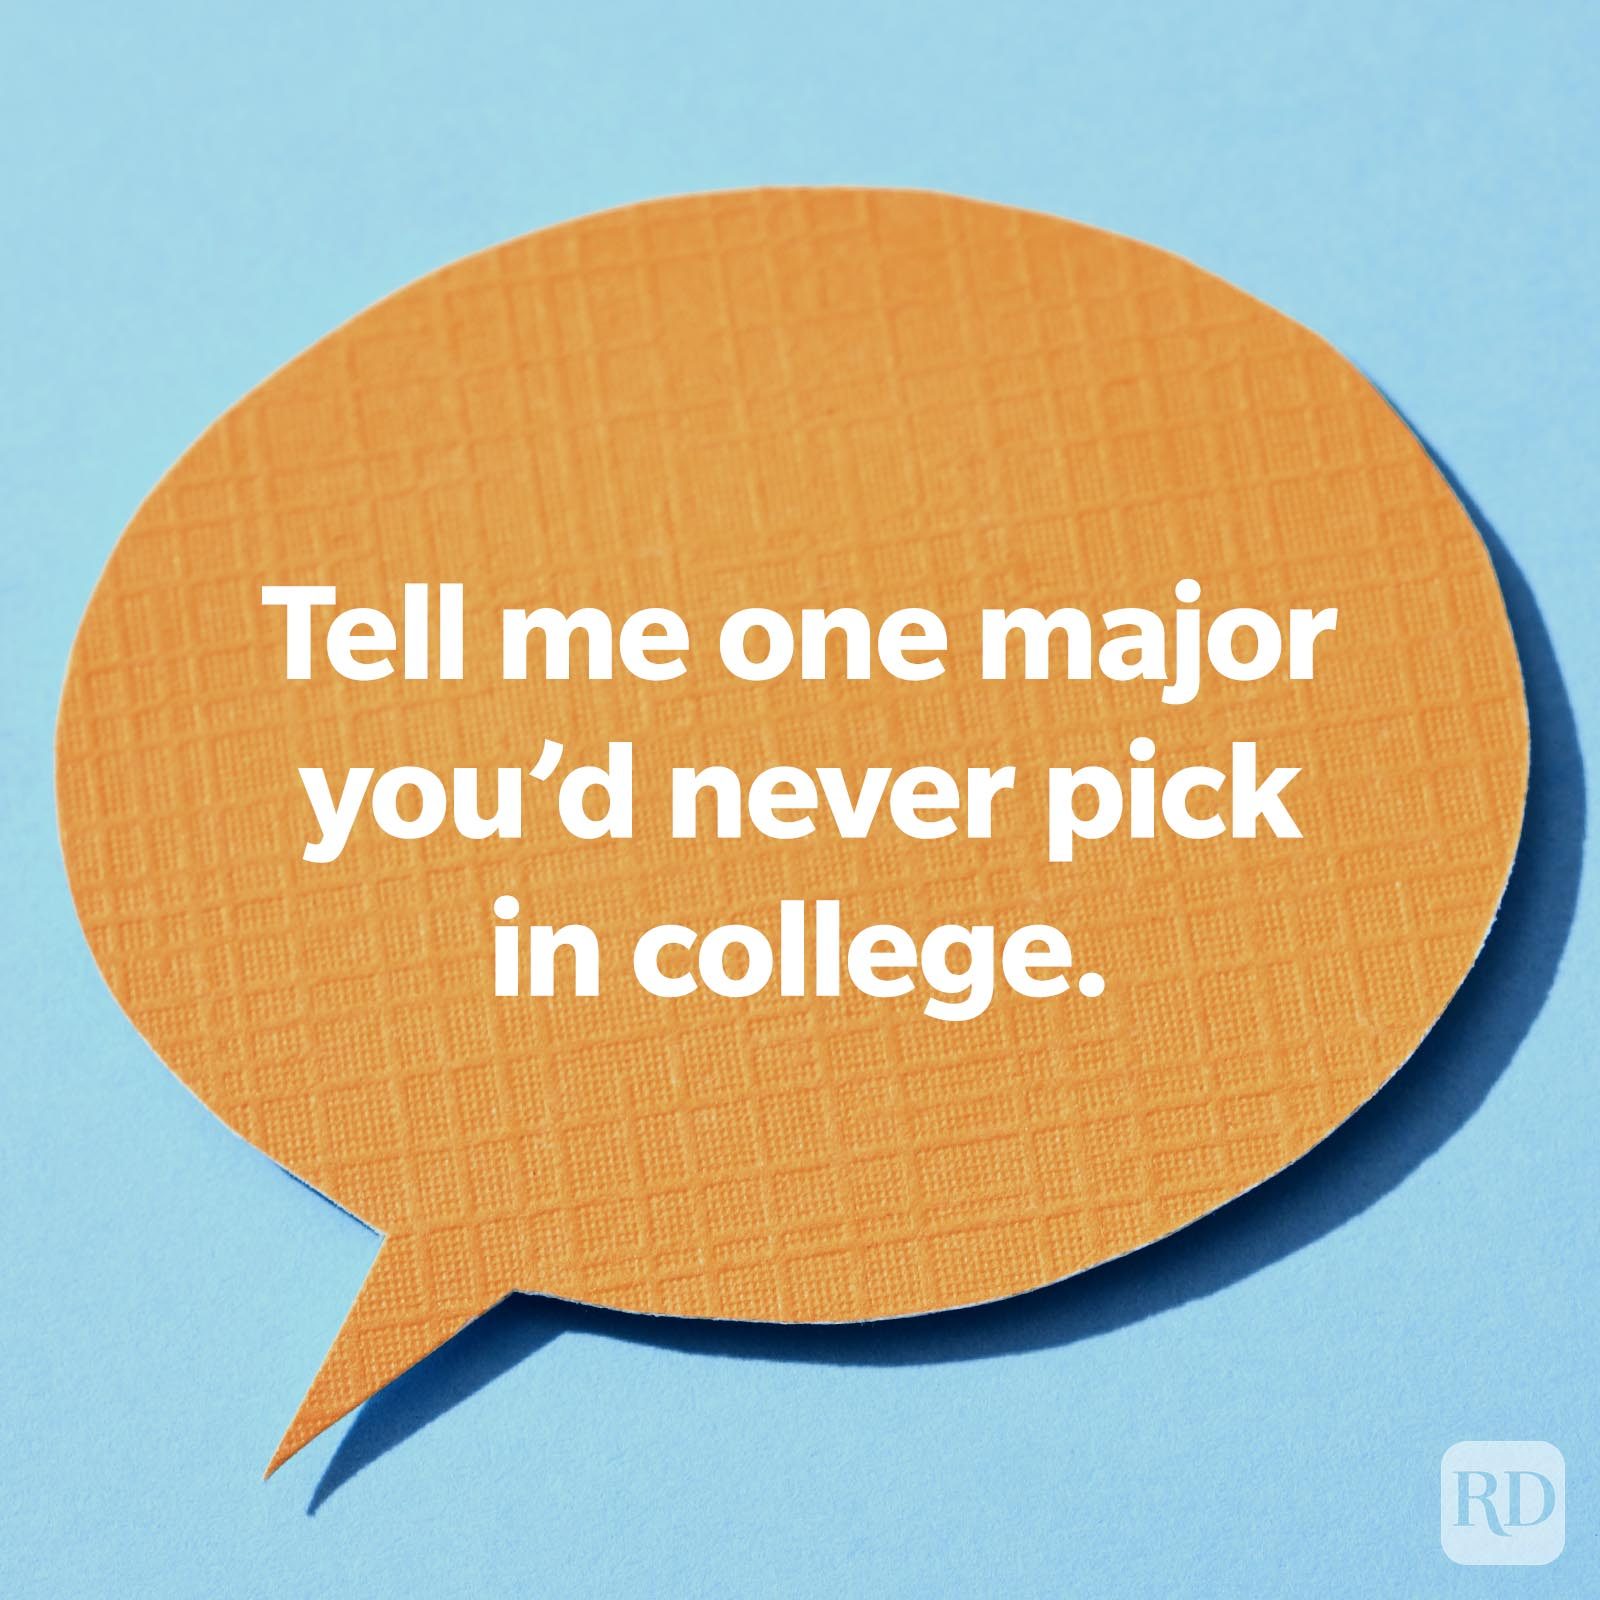 Tell me one major you'd never pick in college.